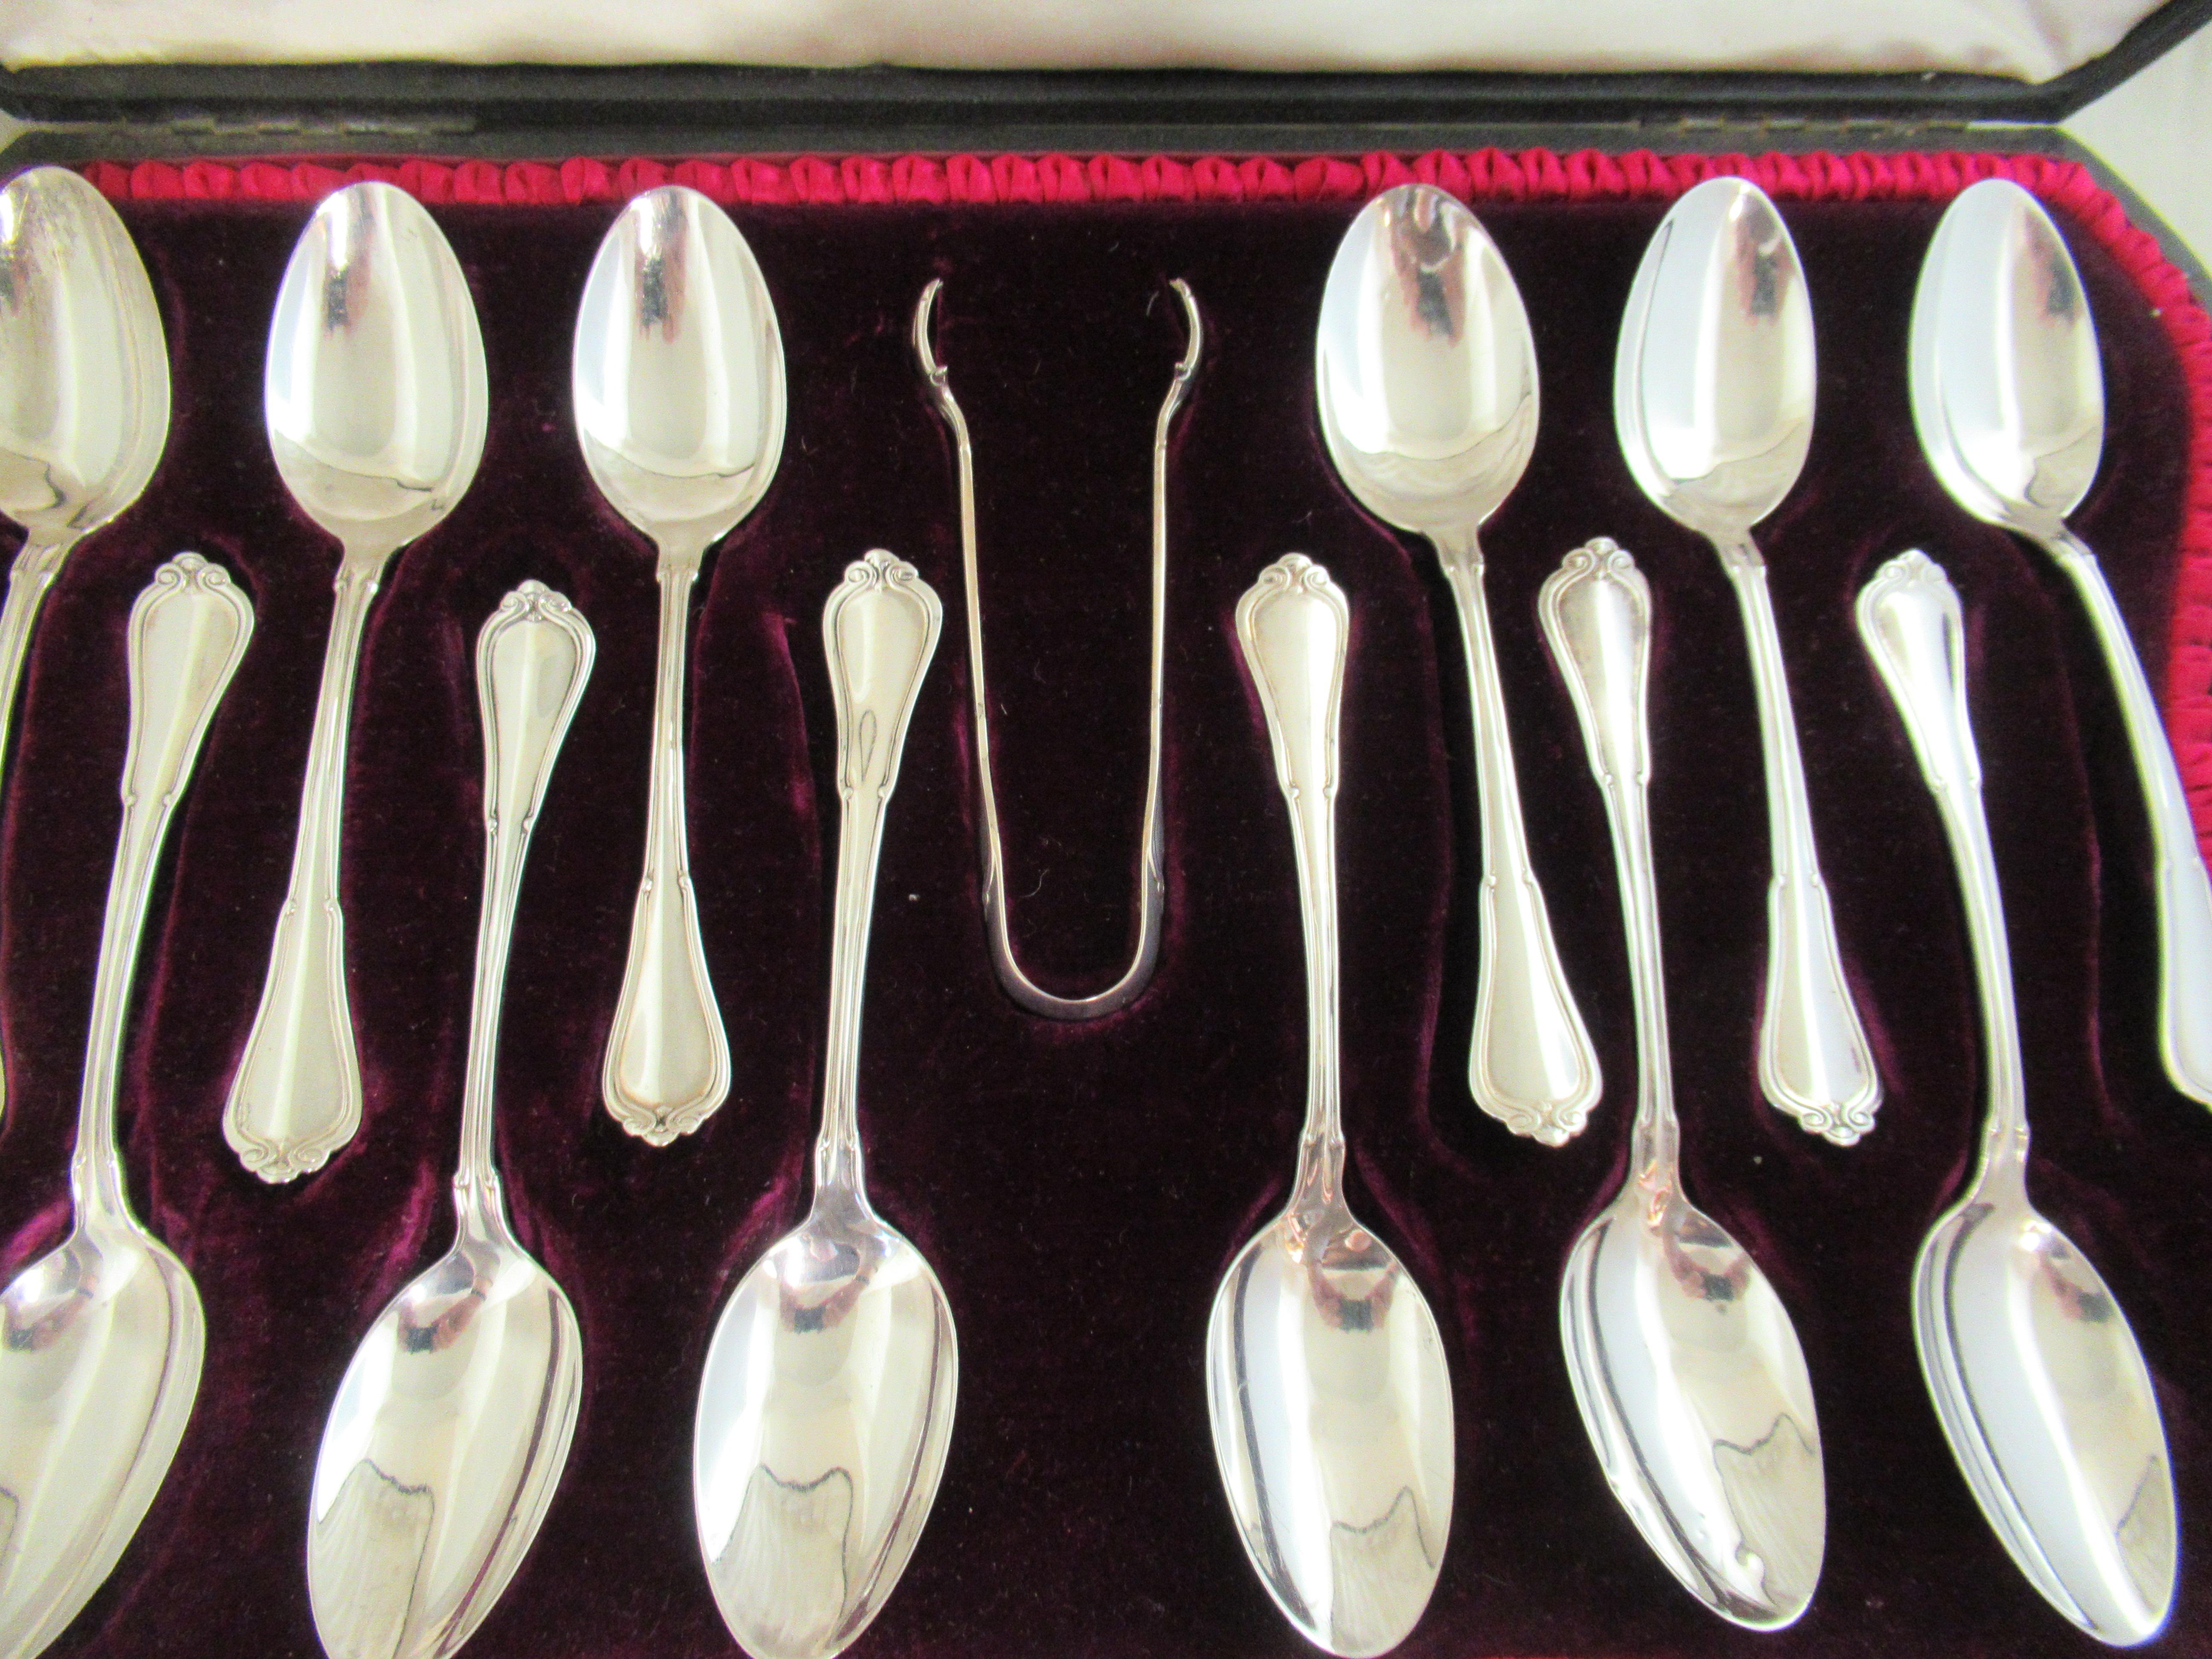 Sterling Silver -  superb box of 12 LARGE TEASPOONS + TONGS, all in beautiful, unused condition.
Made in 1904, and with an English import mark for Birmingham 1904.
The maker`s mark is  G.M.Co., for the Gorham Manufacturing Company, Providence, Rhode